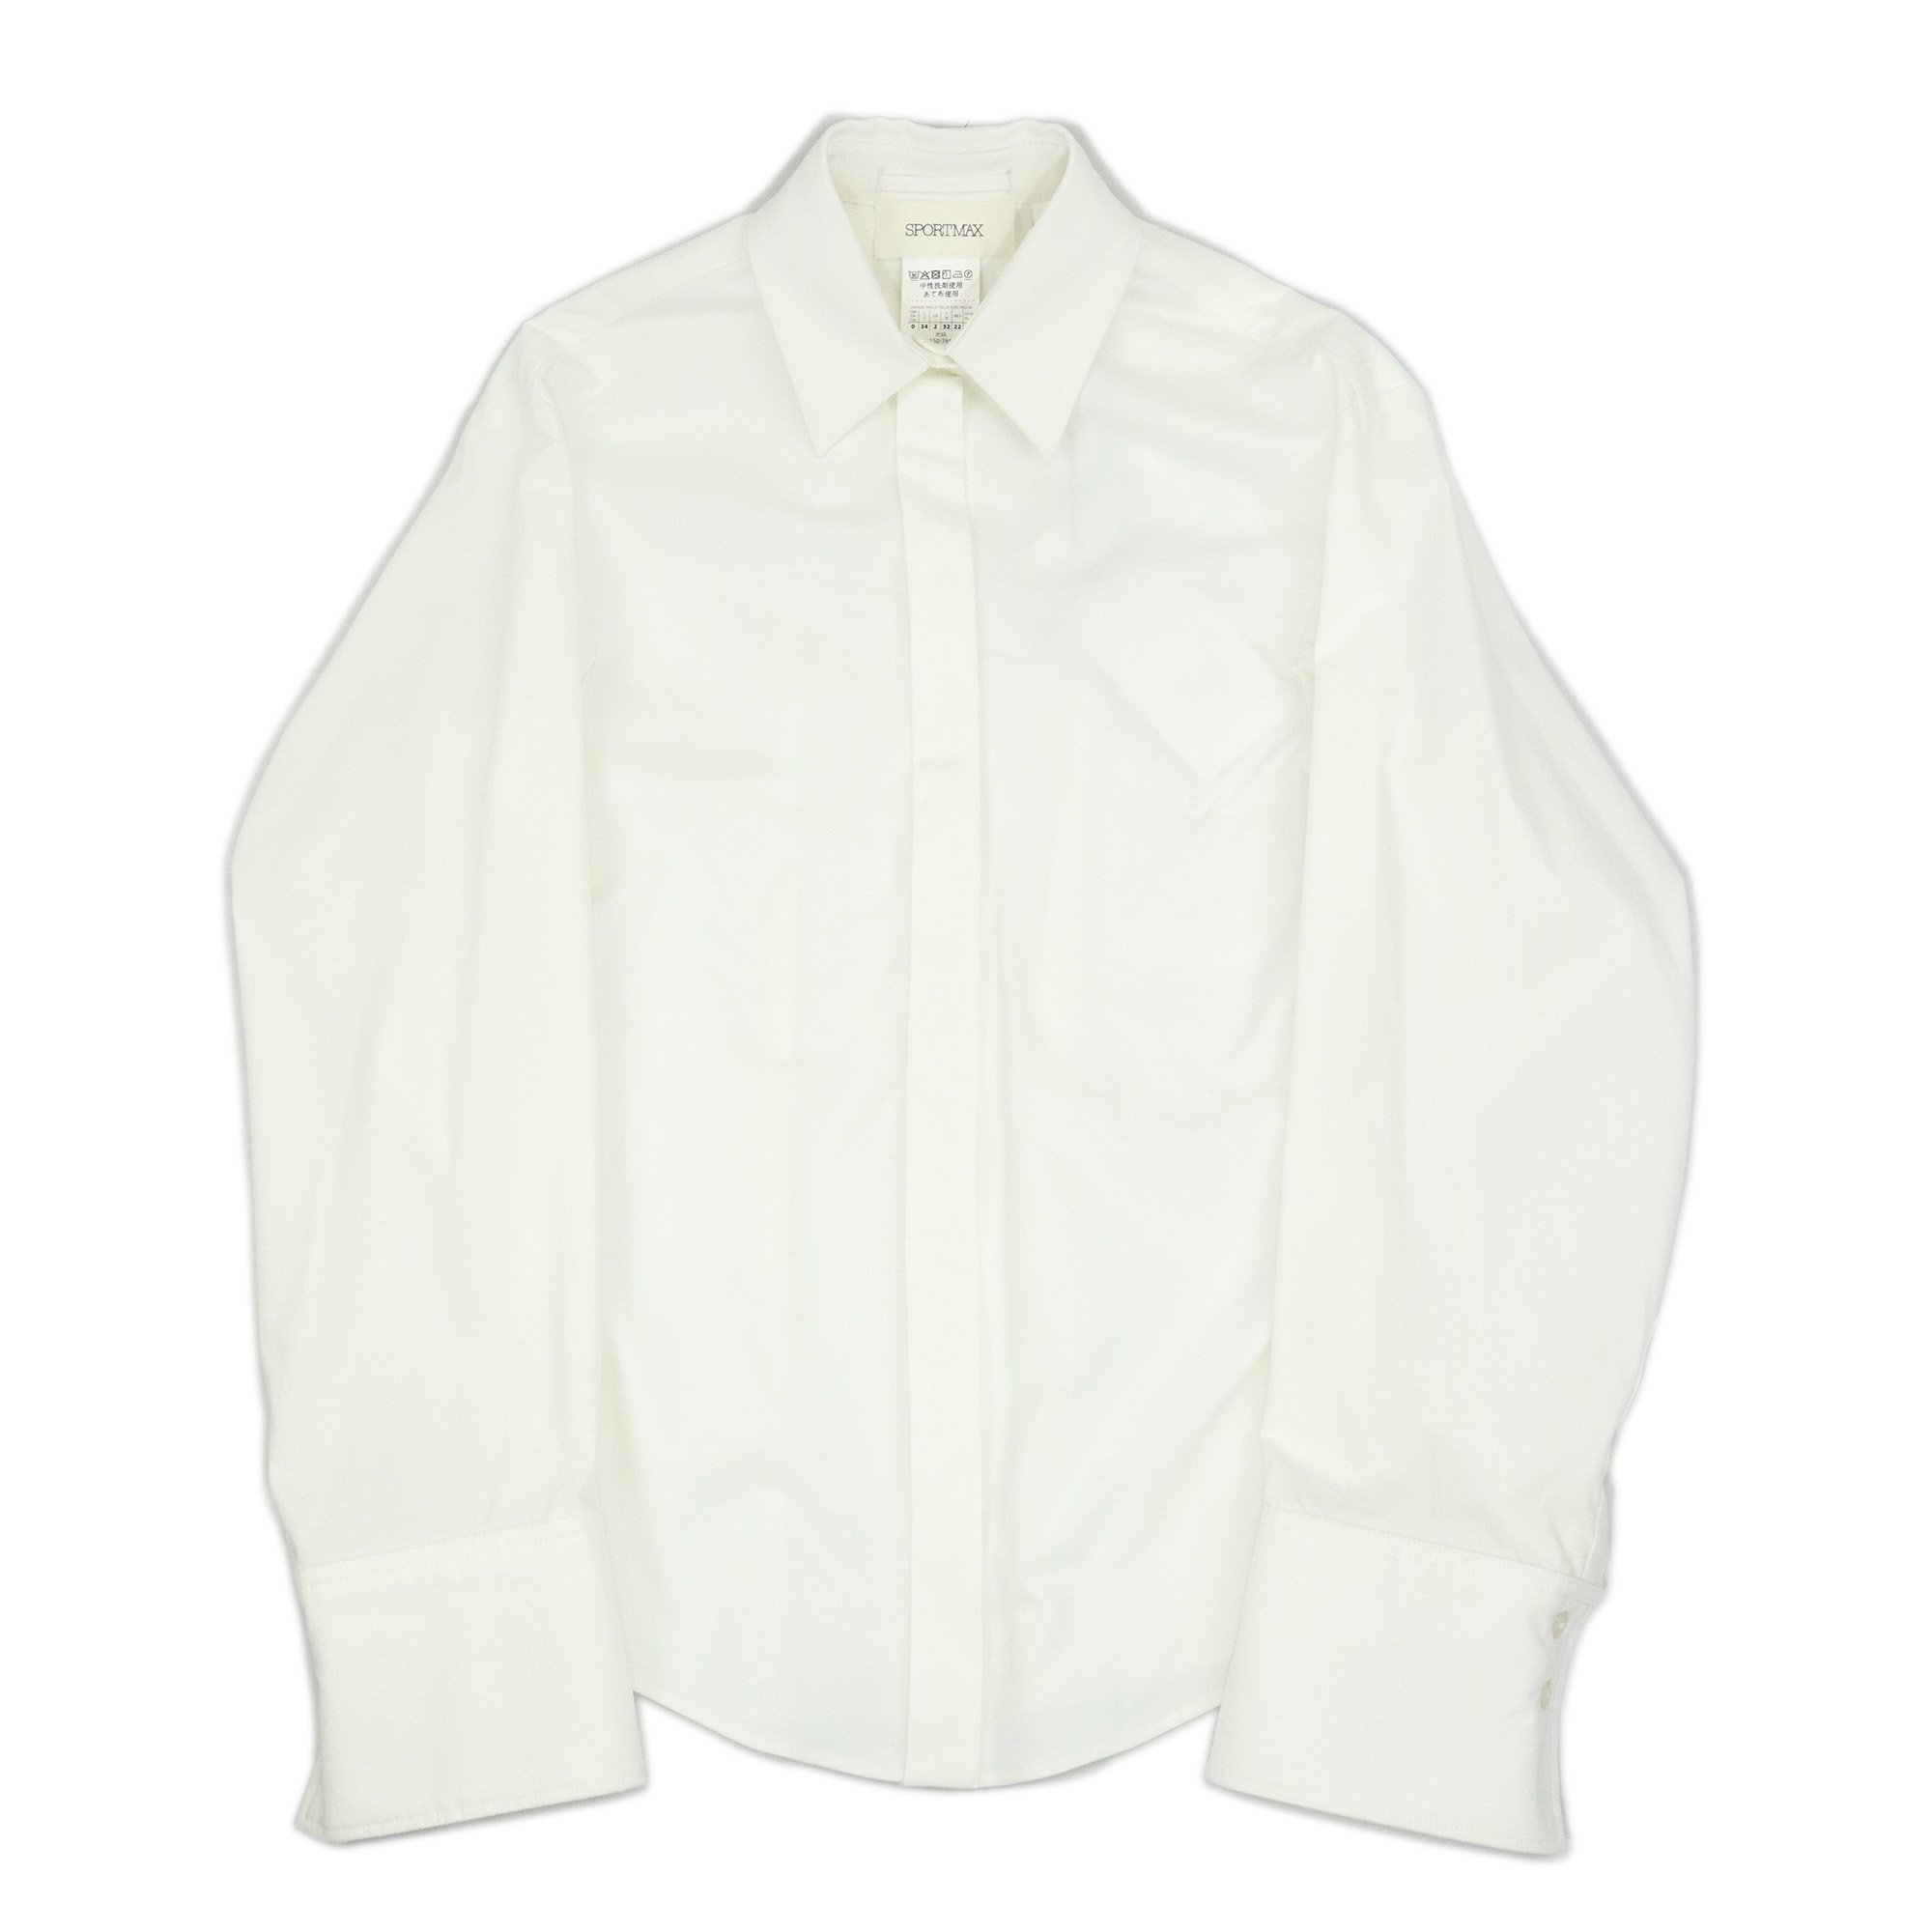 <img class='new_mark_img1' src='https://img.shop-pro.jp/img/new/icons21.gif' style='border:none;display:inline;margin:0px;padding:0px;width:auto;' />【40%OFF】SPORT MAX SHIRT【WHITE】